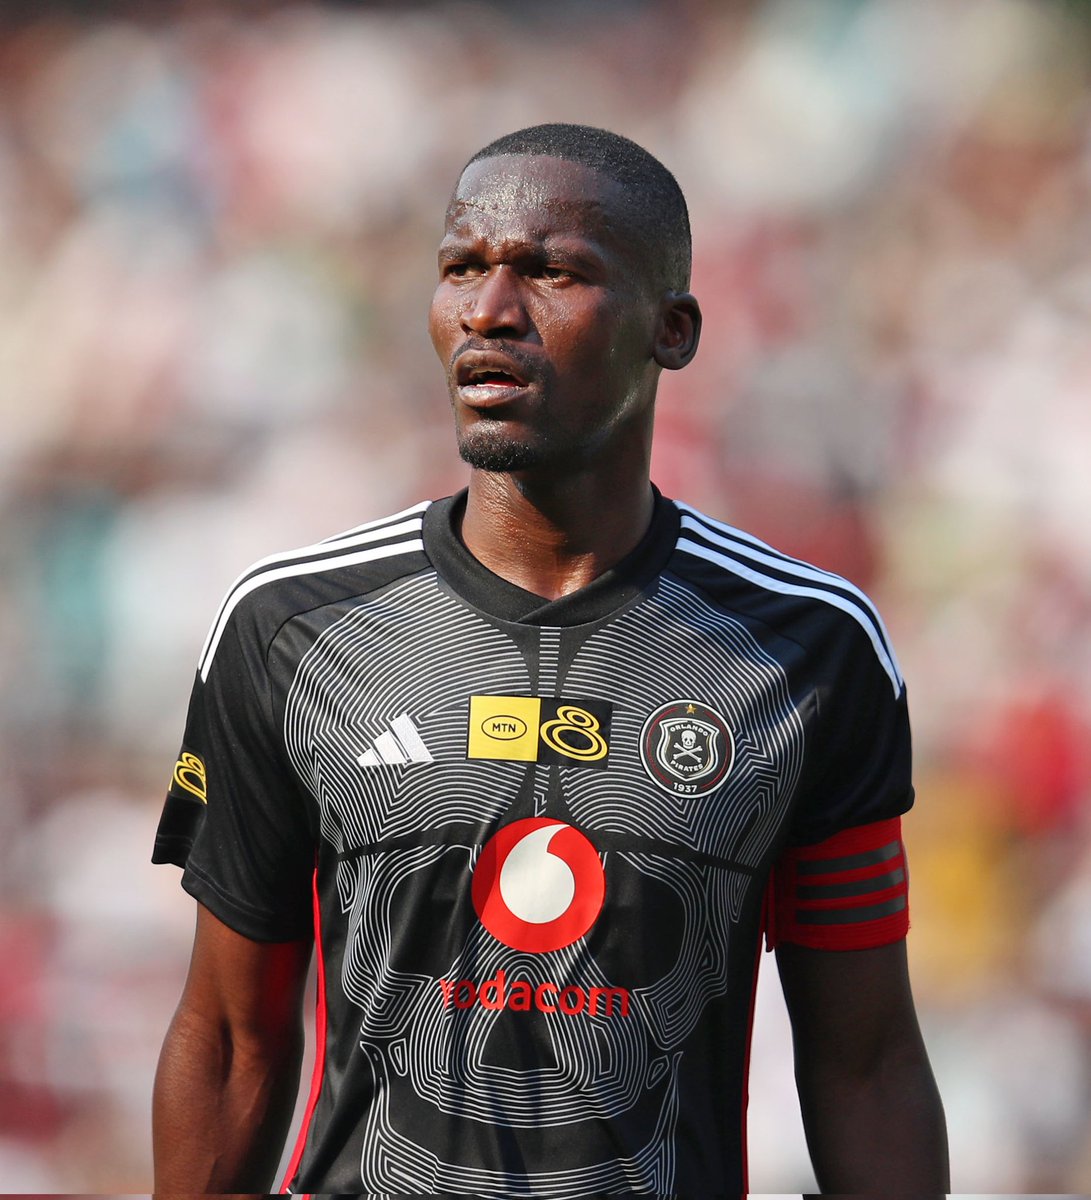 Speedy recovery to Thapelo Xoki💔. We'll miss you, buccaneer ☠️☠️. #OnceAlways